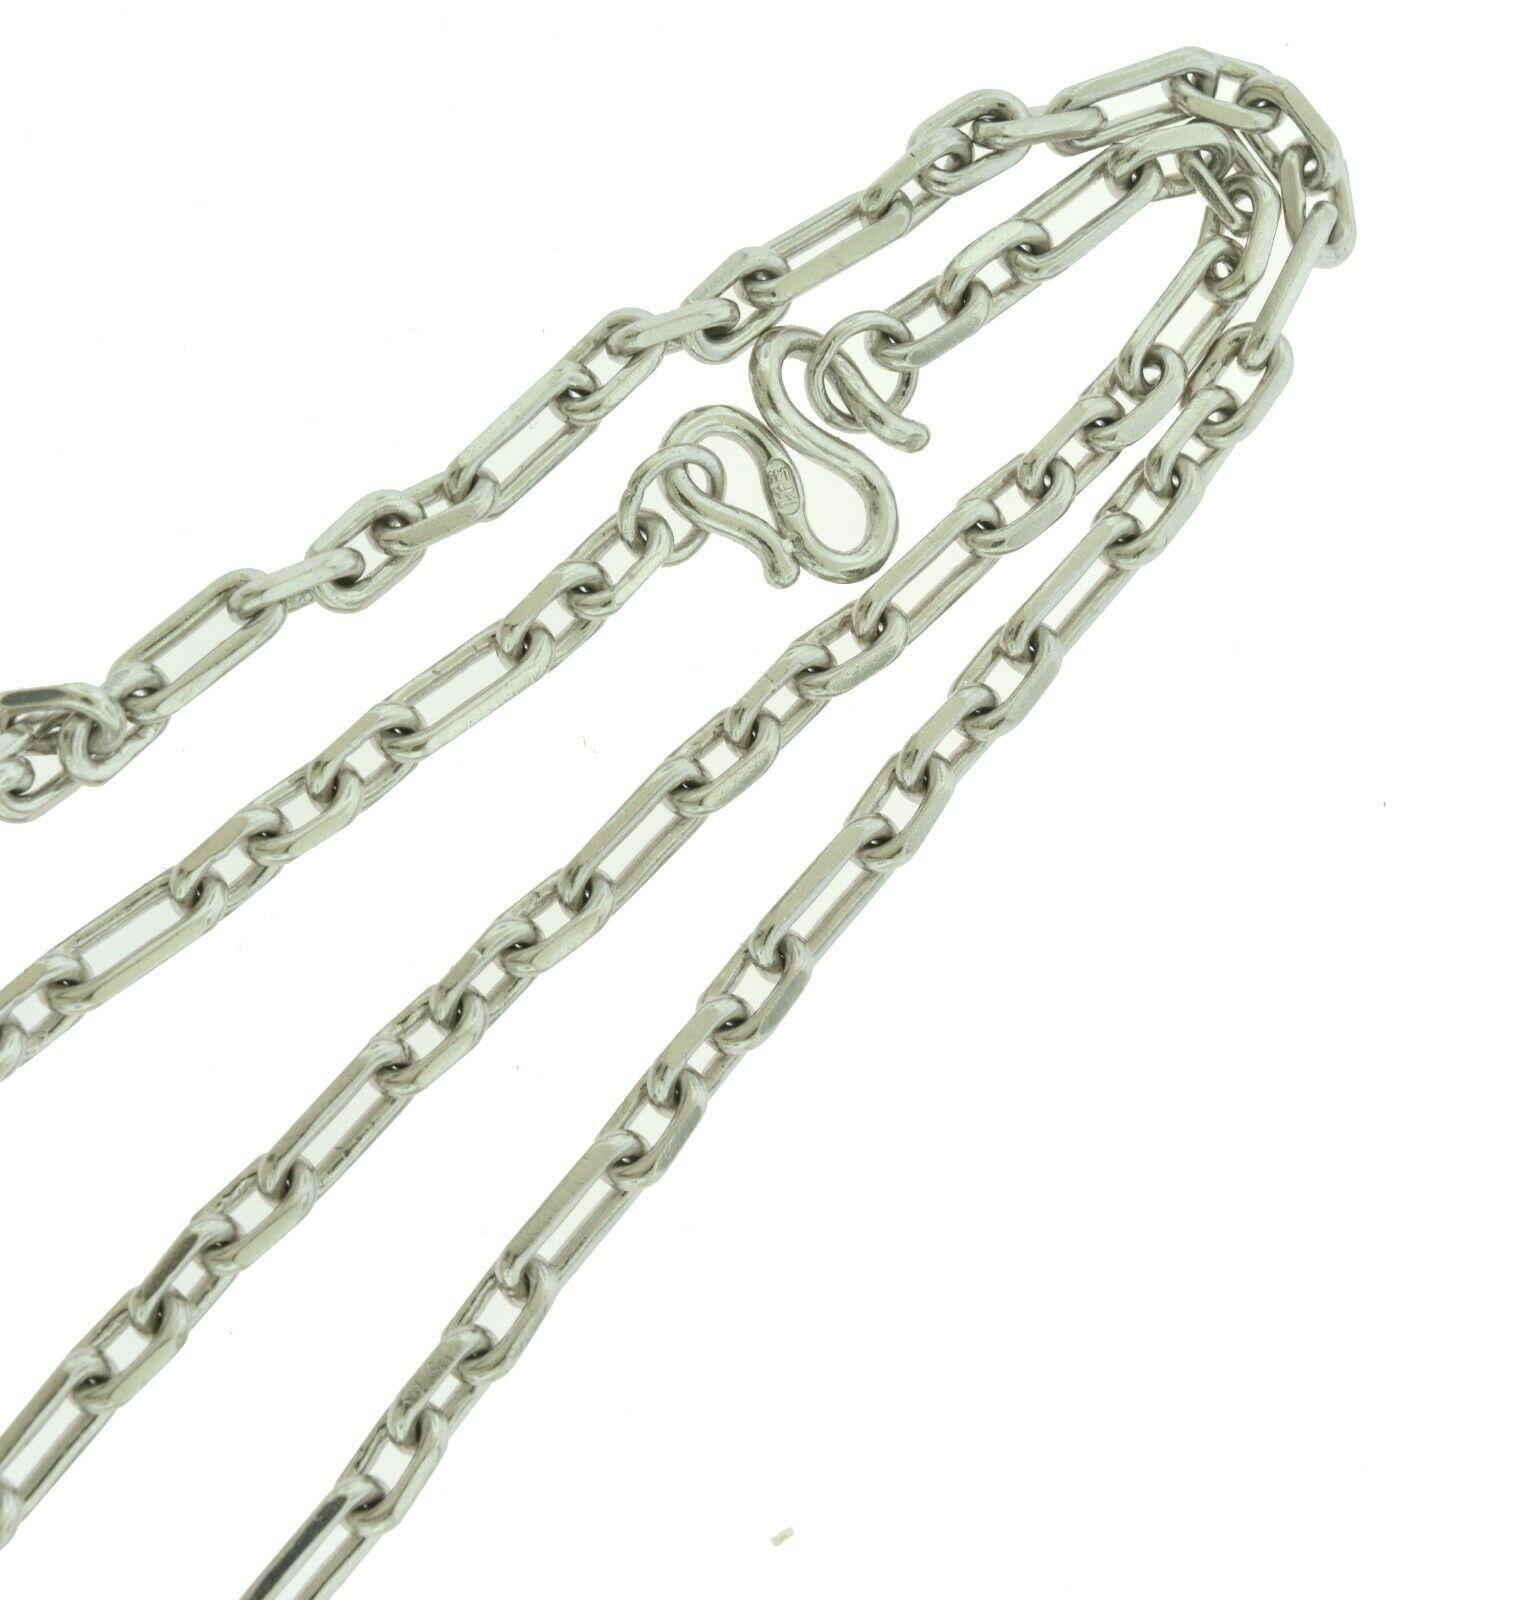 Brilliance Jewels, Miami
Questions? Call Us Anytime!
786,482,8100

Style: Box Link Chain

Metal: Platinum

Necklace Length: 24 inches 

Necklace Width: 4.86 mm

Closure: Hook and eye 

Includes: Brilliance Jewels 24 month Warranty Card

            